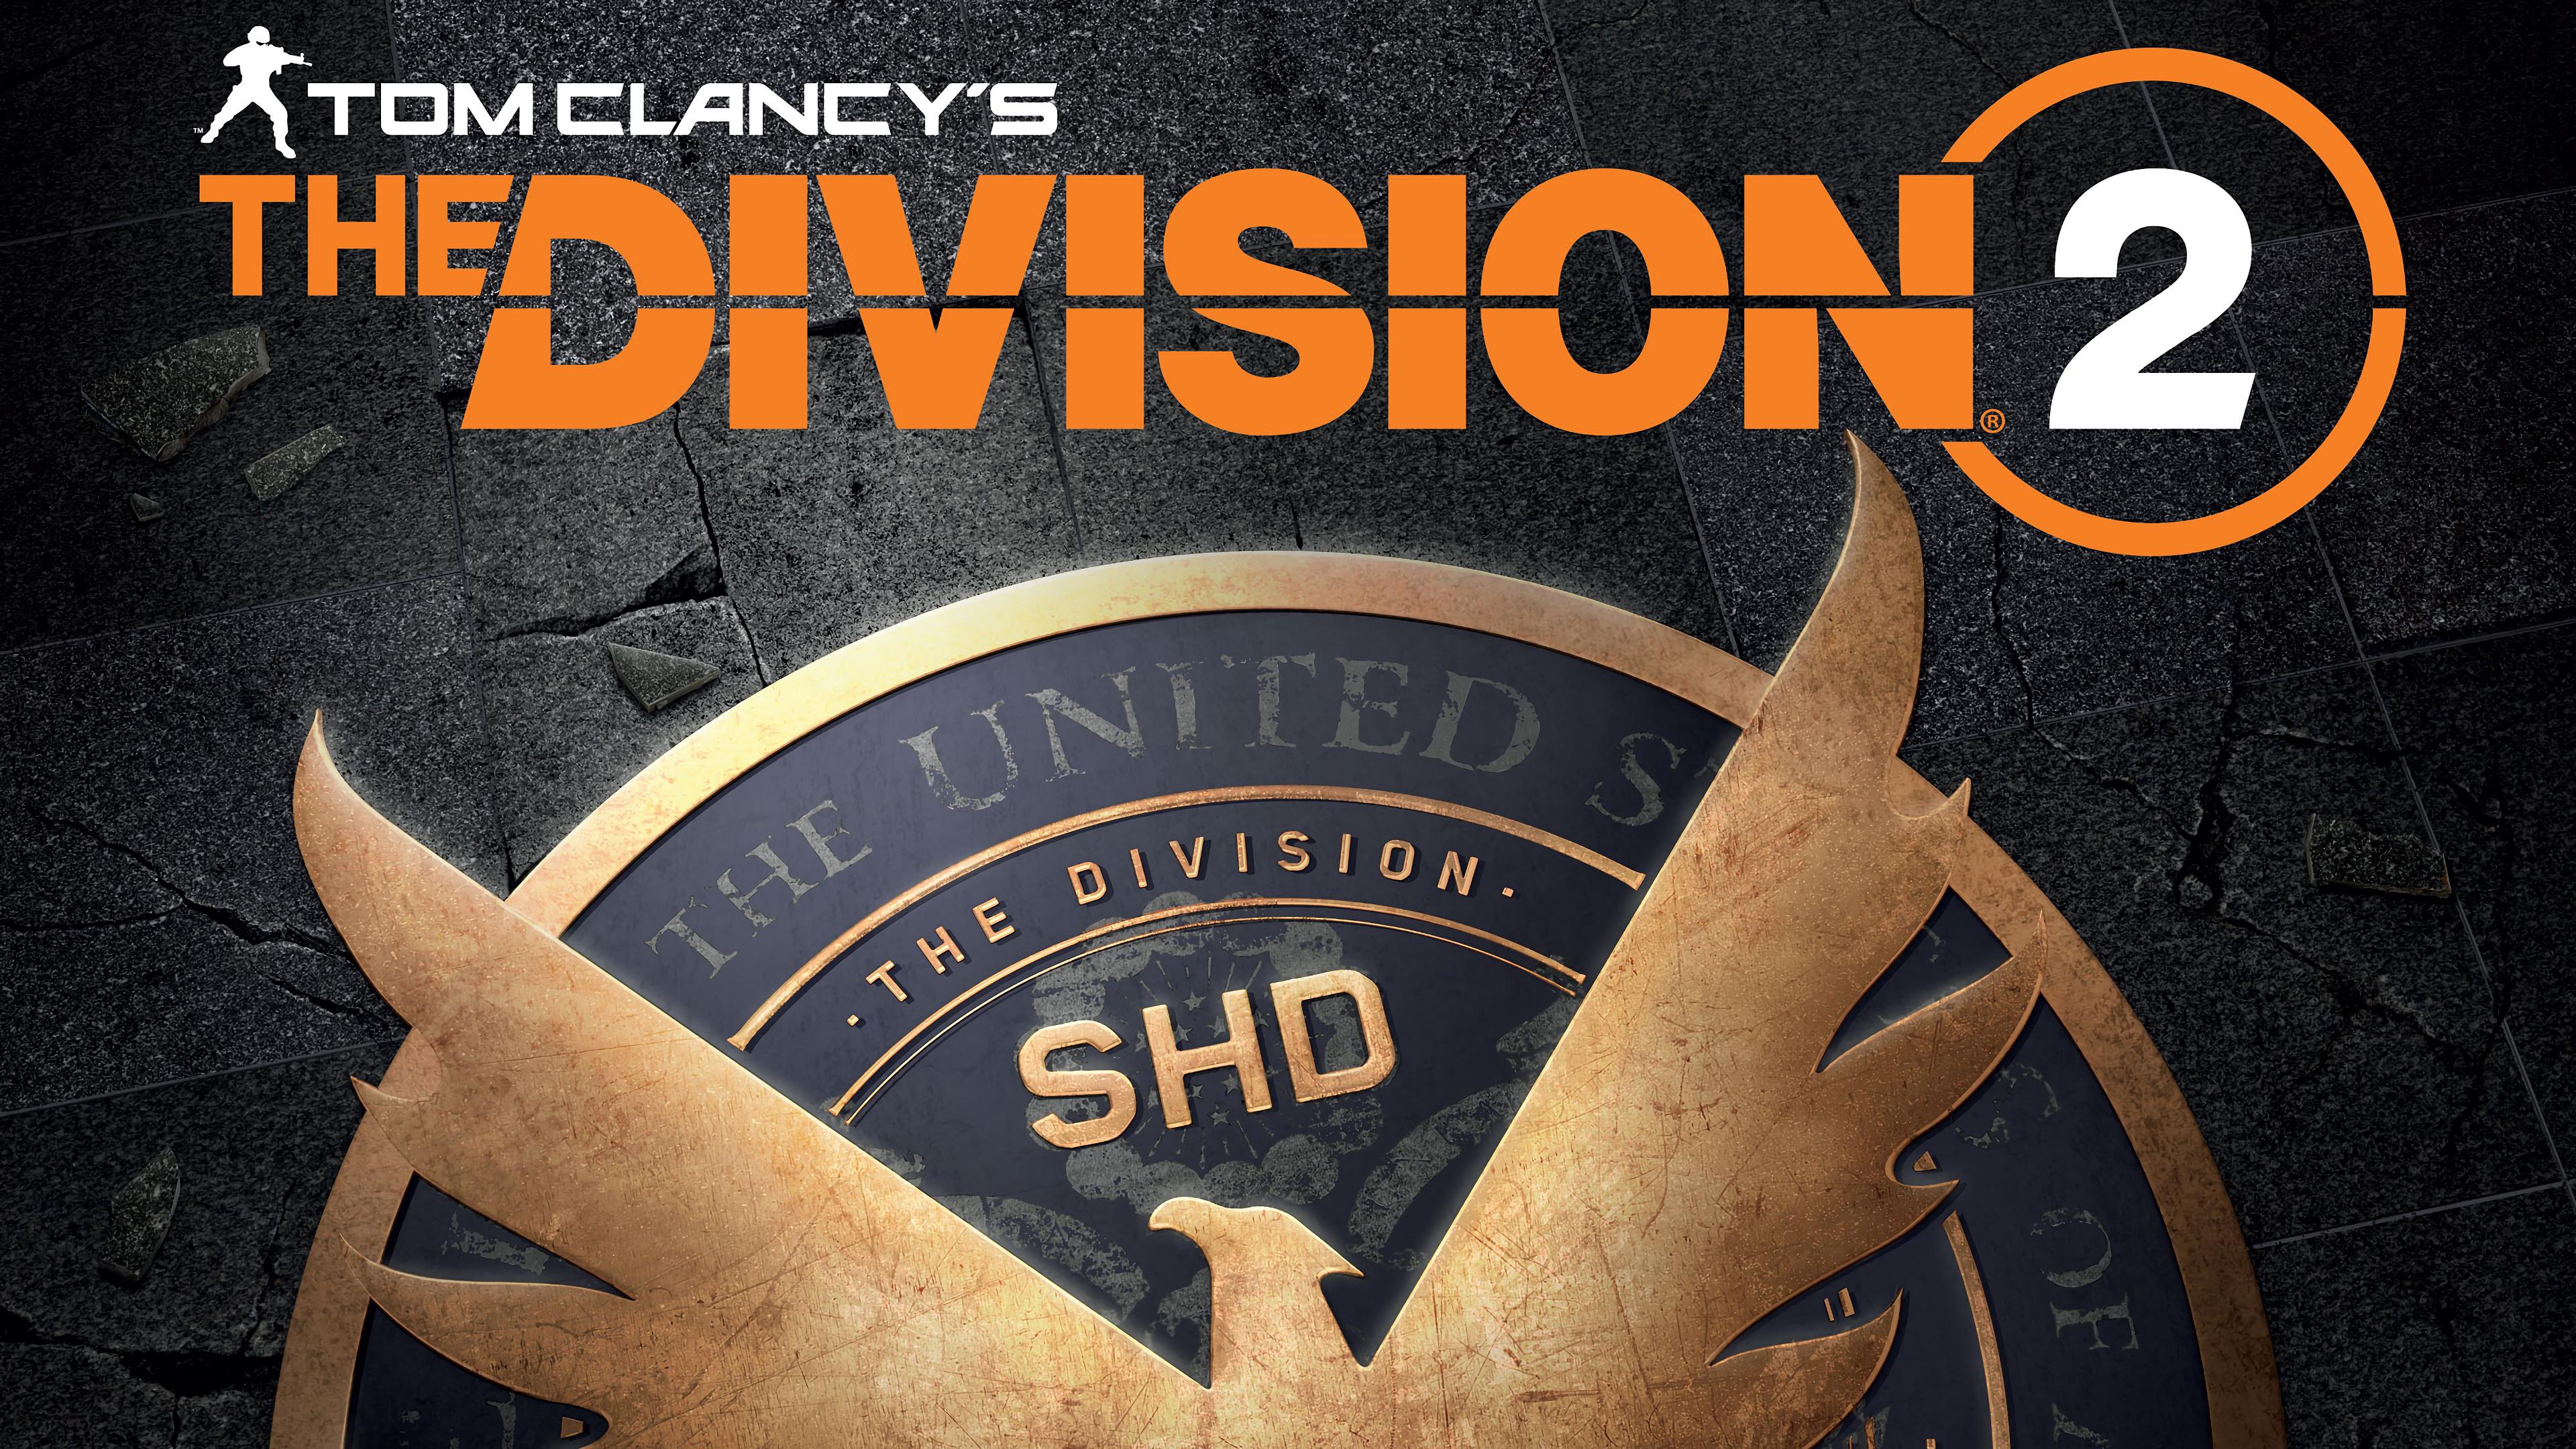 Tom Clancy's The Division 2 4k Ultra HD Wallpaper. Background